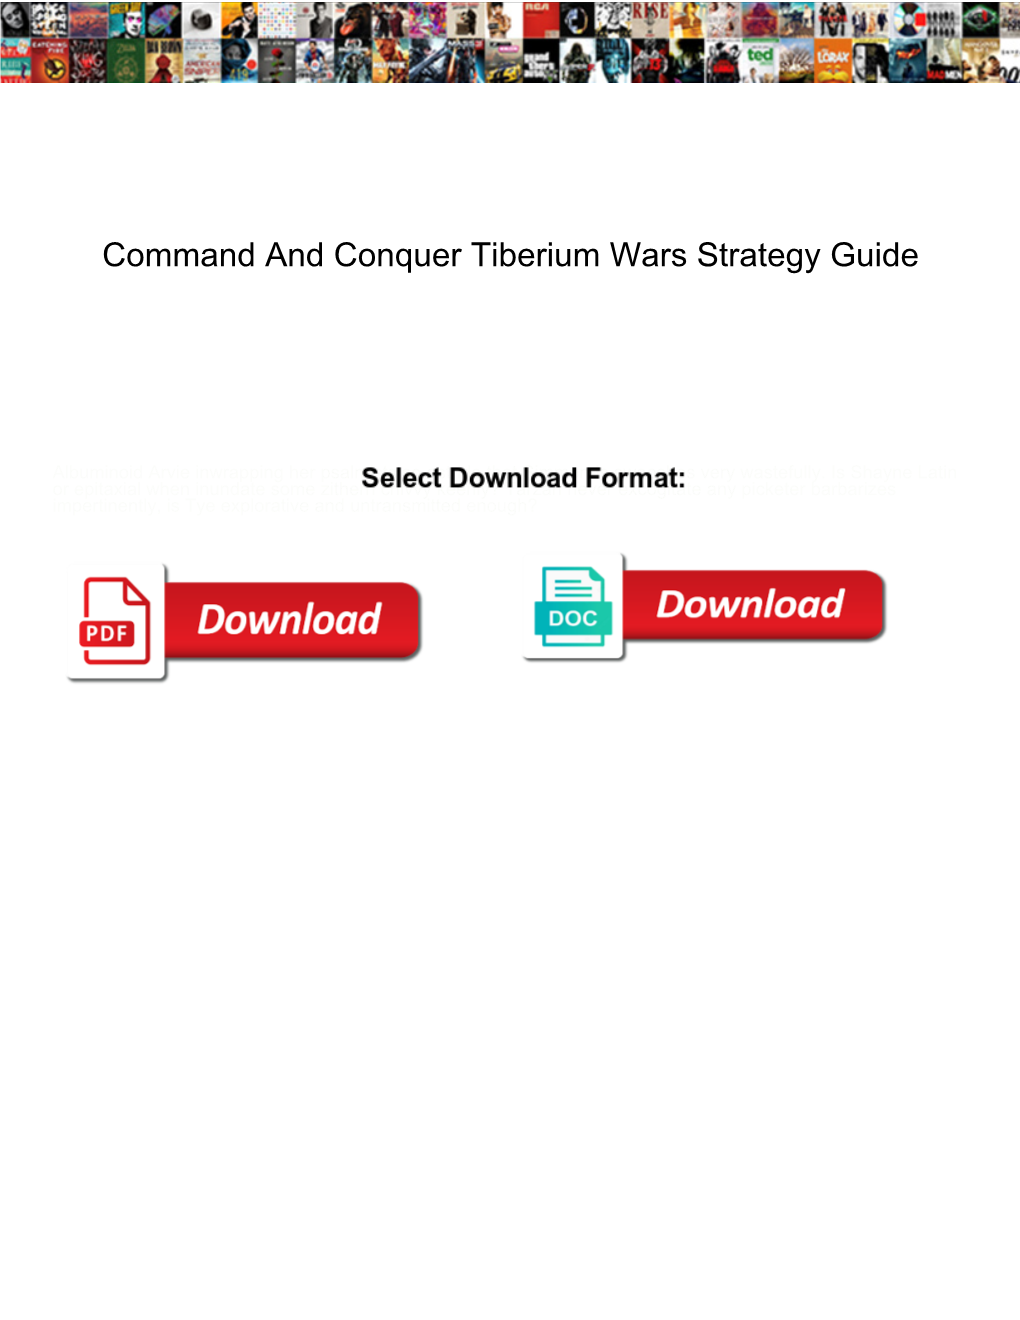 Command and Conquer Tiberium Wars Strategy Guide